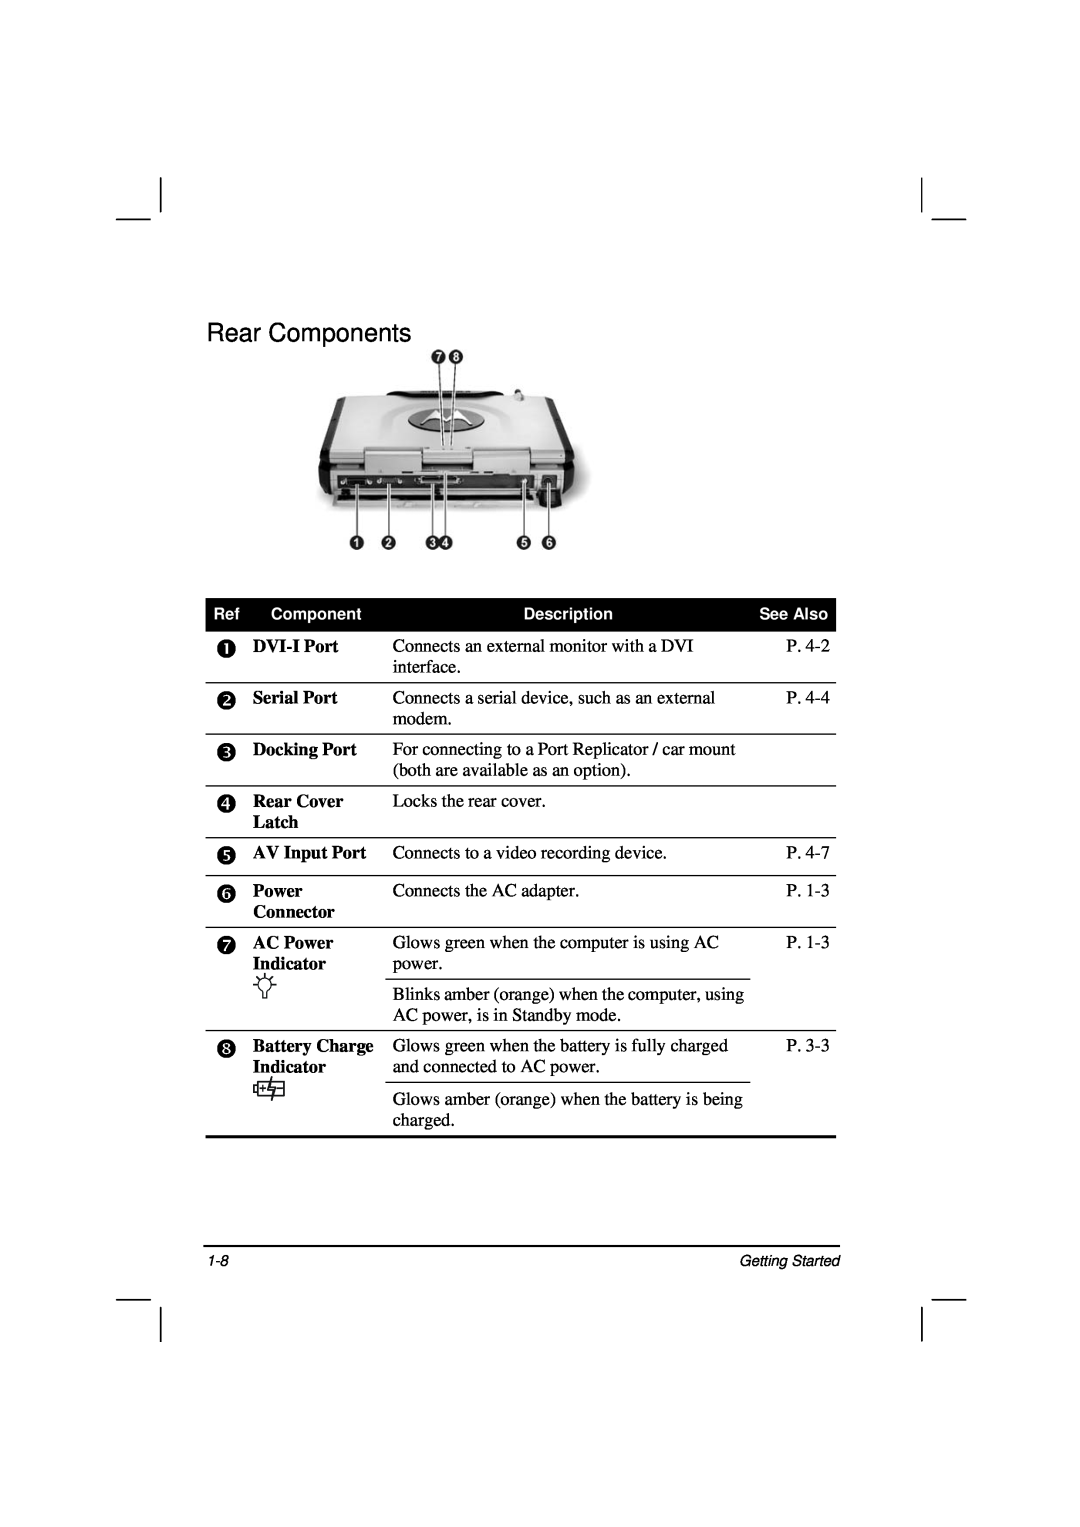 Casio HK1223 owner manual Rear Components, Getting Started 